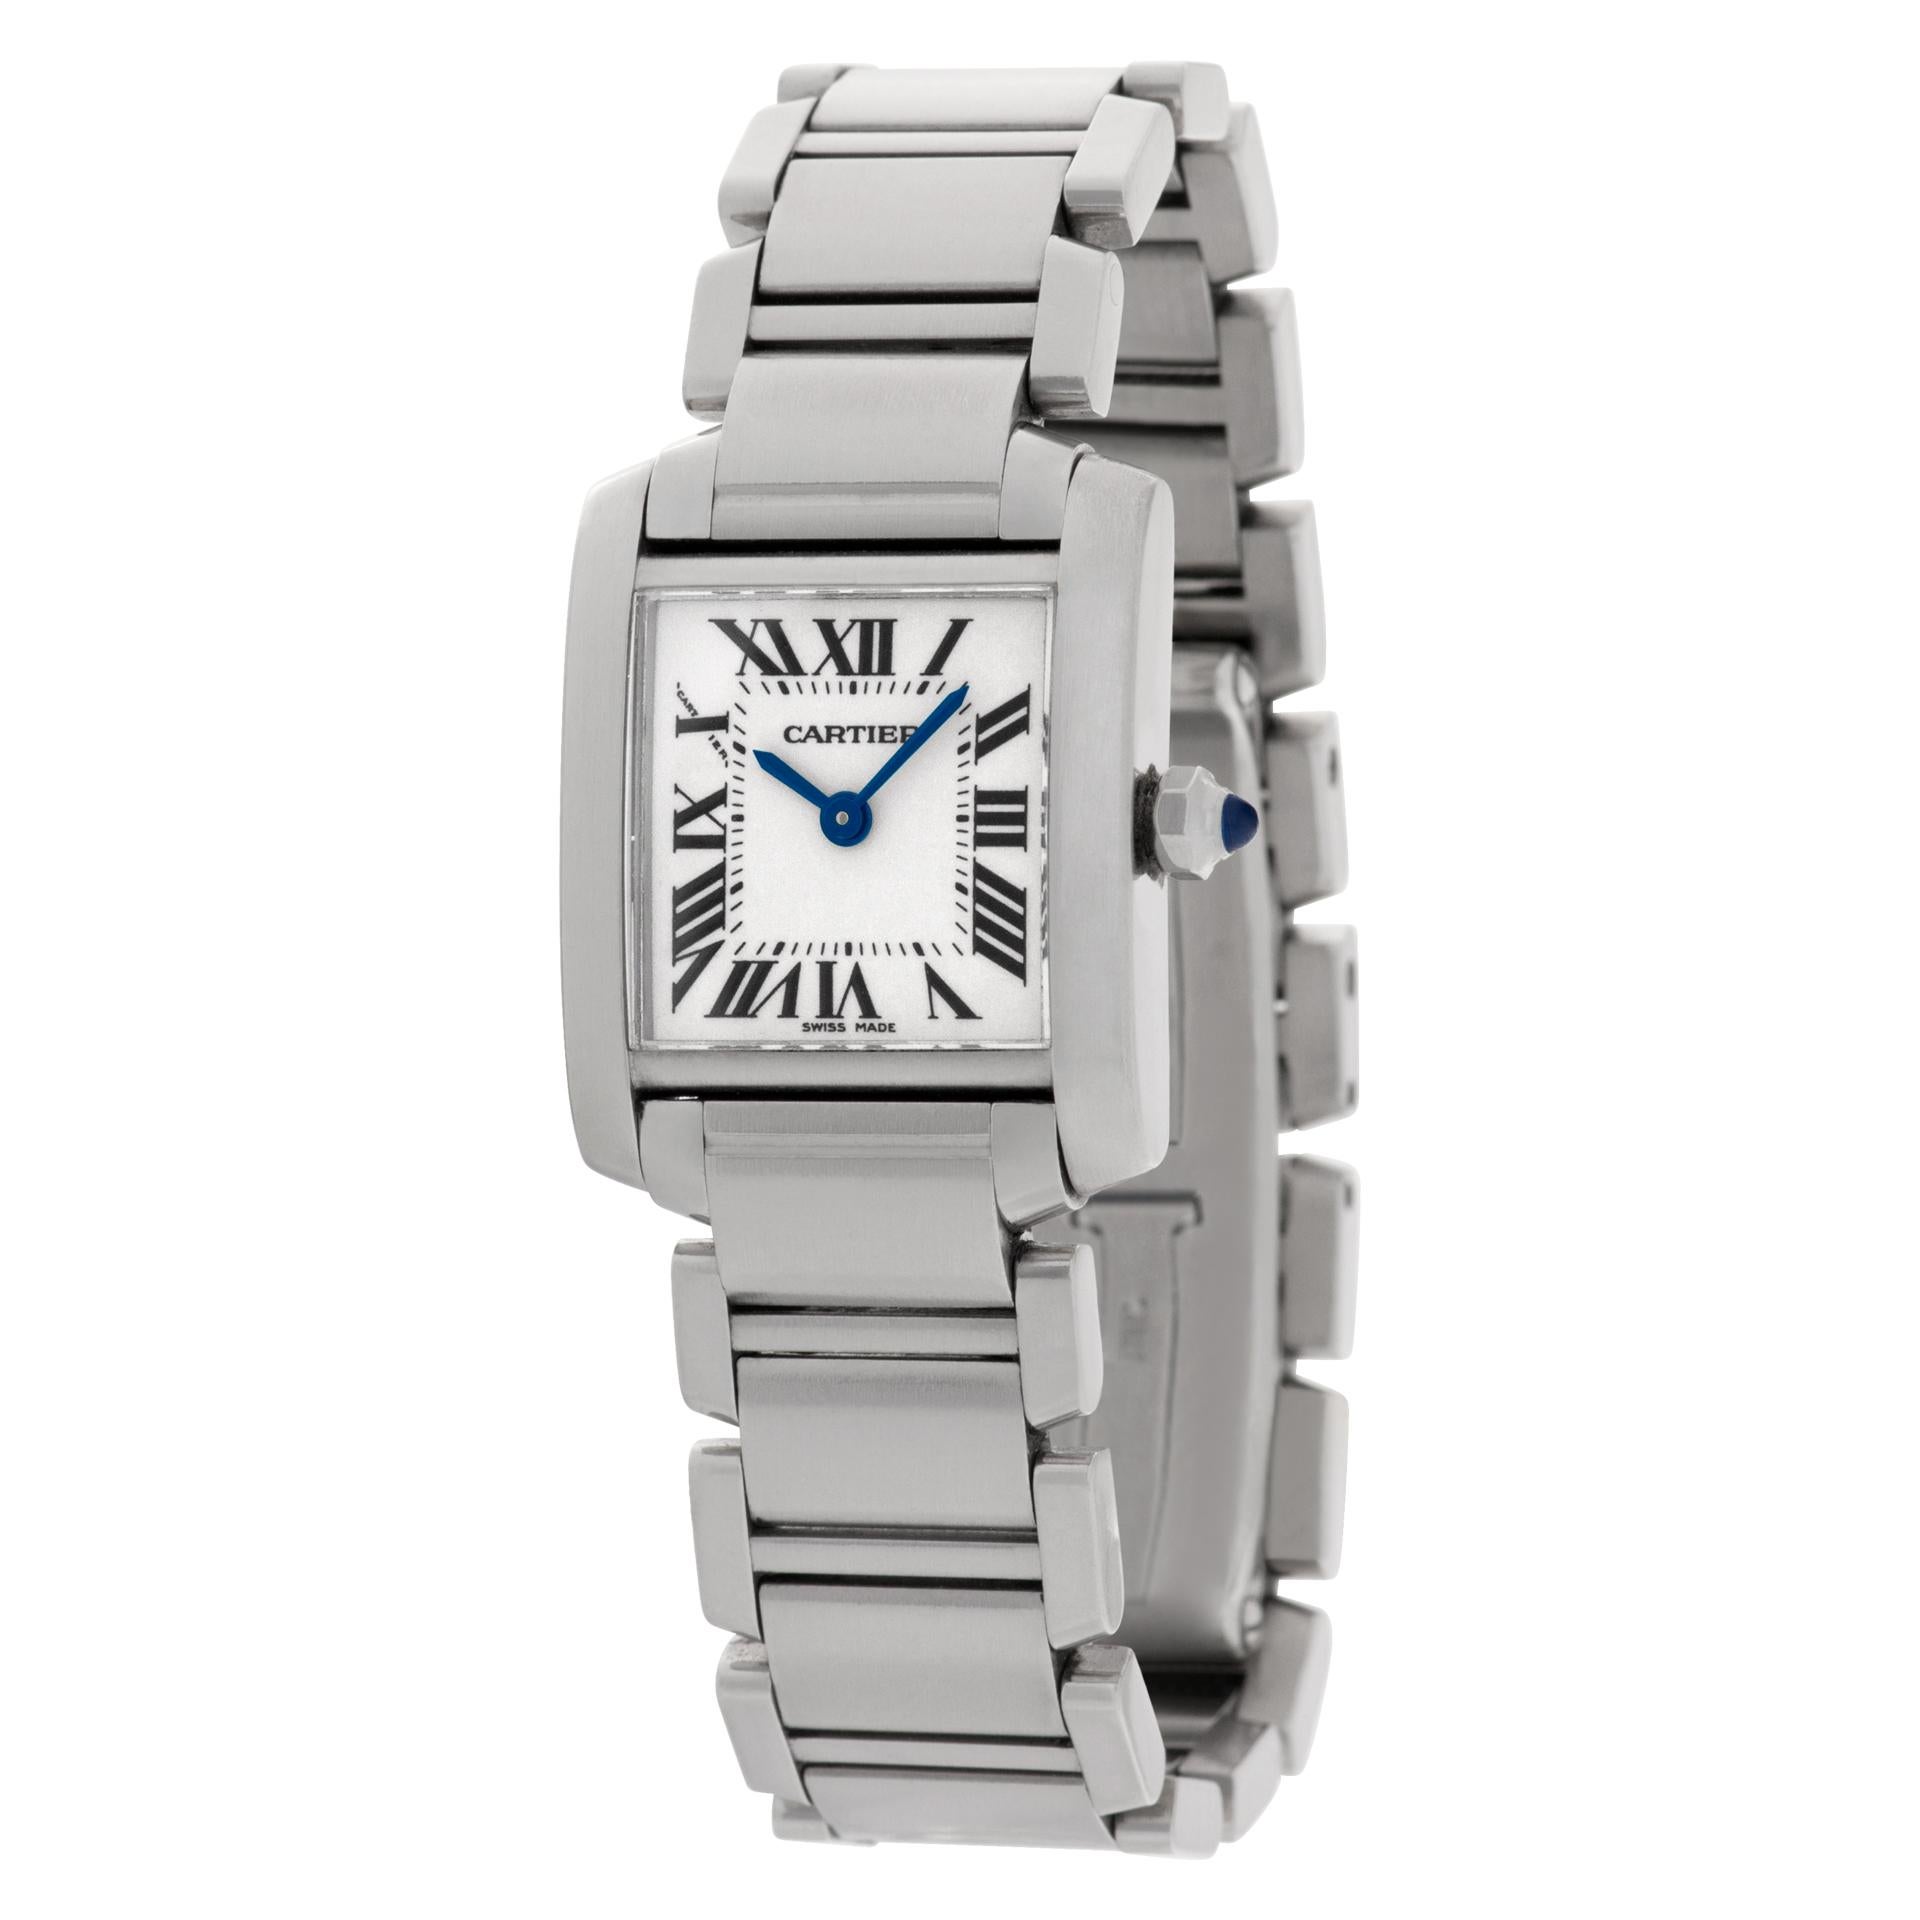 Cartier Tank Francaise in stainless steel. Quartz. Case size 20.5mm. Ref W51008Q3. Fine Pre-owned Cartier Watch.   Certified preowned Classic Cartier Tank Francaise W51008Q3 watch is made out of Stainless steel on a Stainless Steel bracelet with a